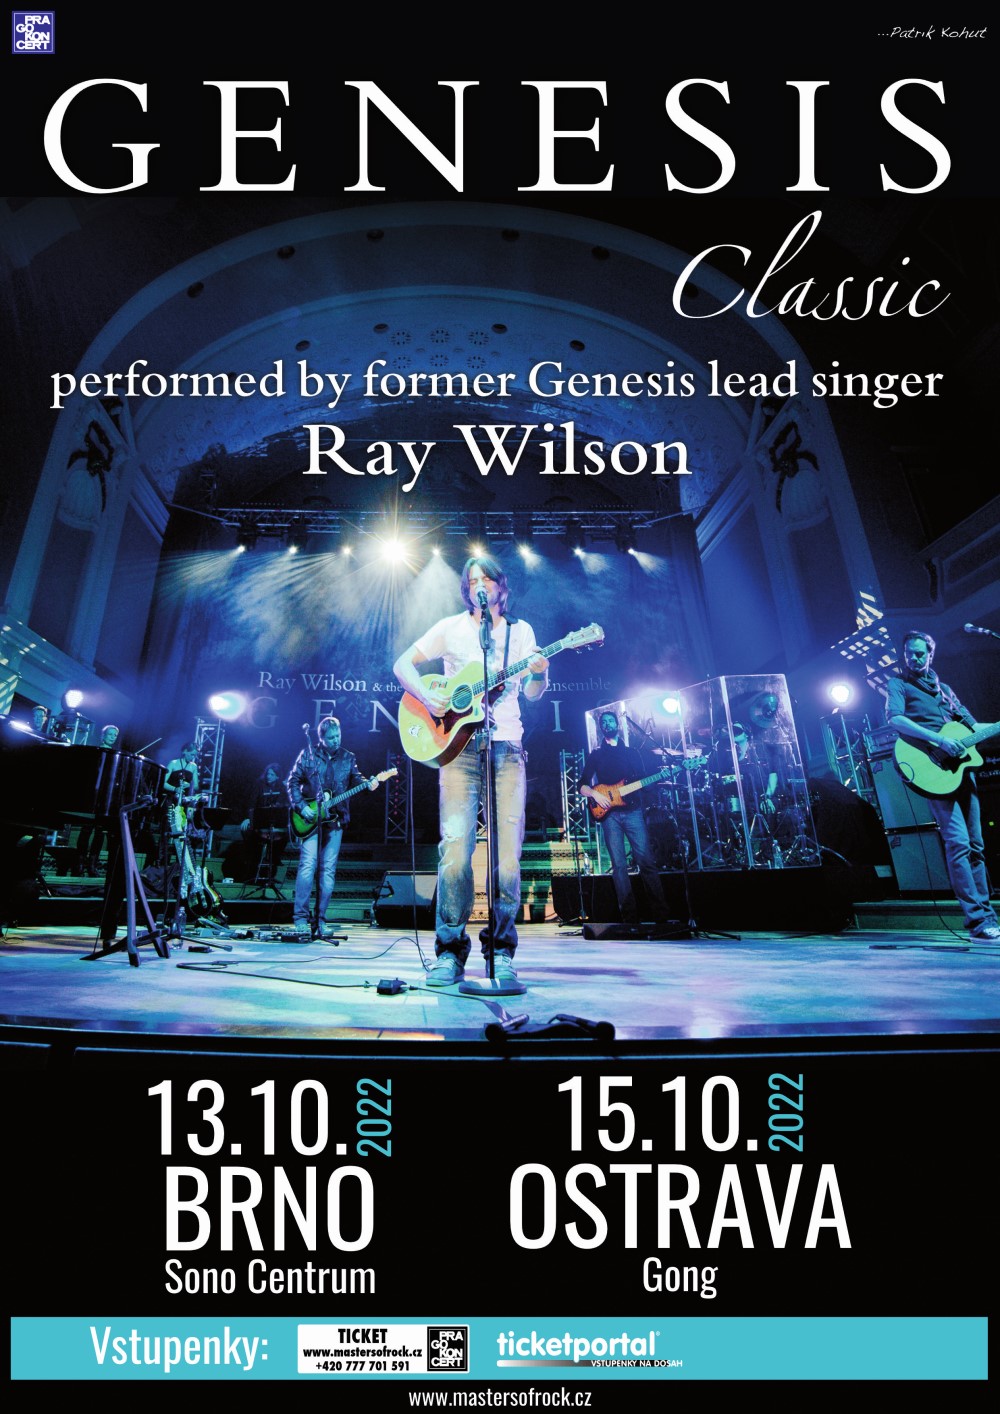 picture GENESIS CLASSIC PERFORMED BY RAY WILSON